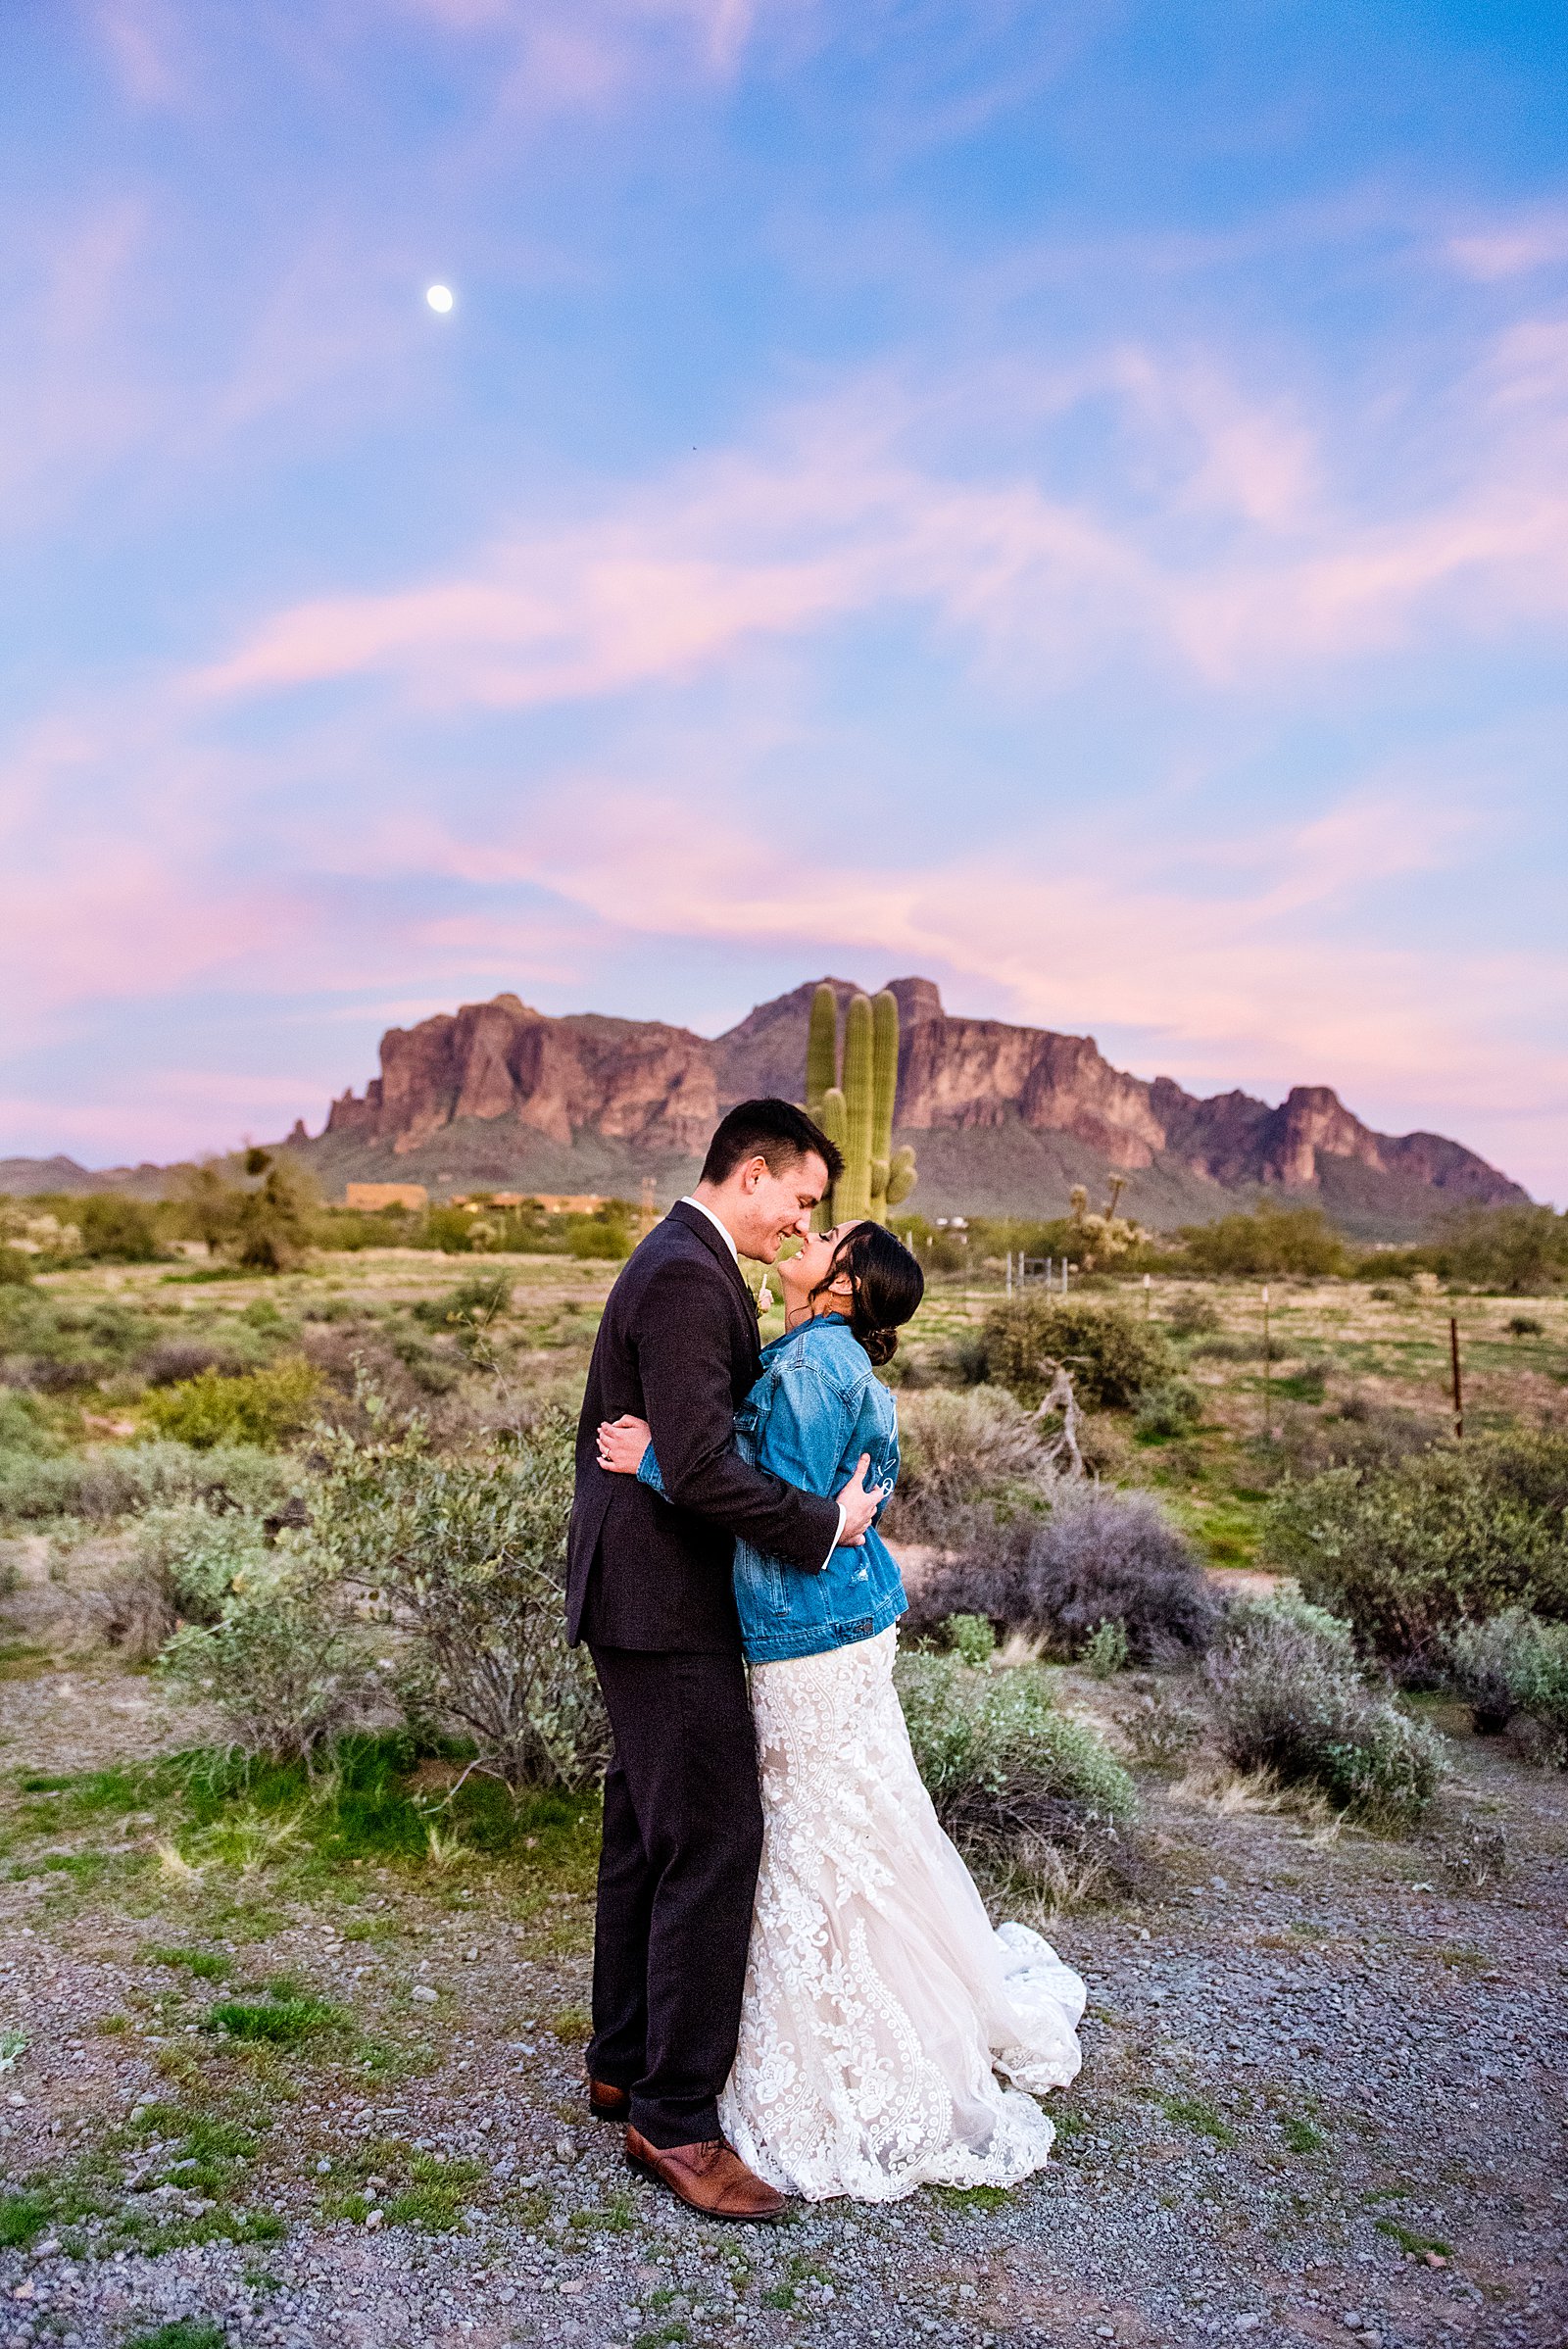 Bride and Groom share an intimate moment at sunset with epic views of the superstition mountains at their The Paseo wedding by Arizona wedding photographer PMA Photography.